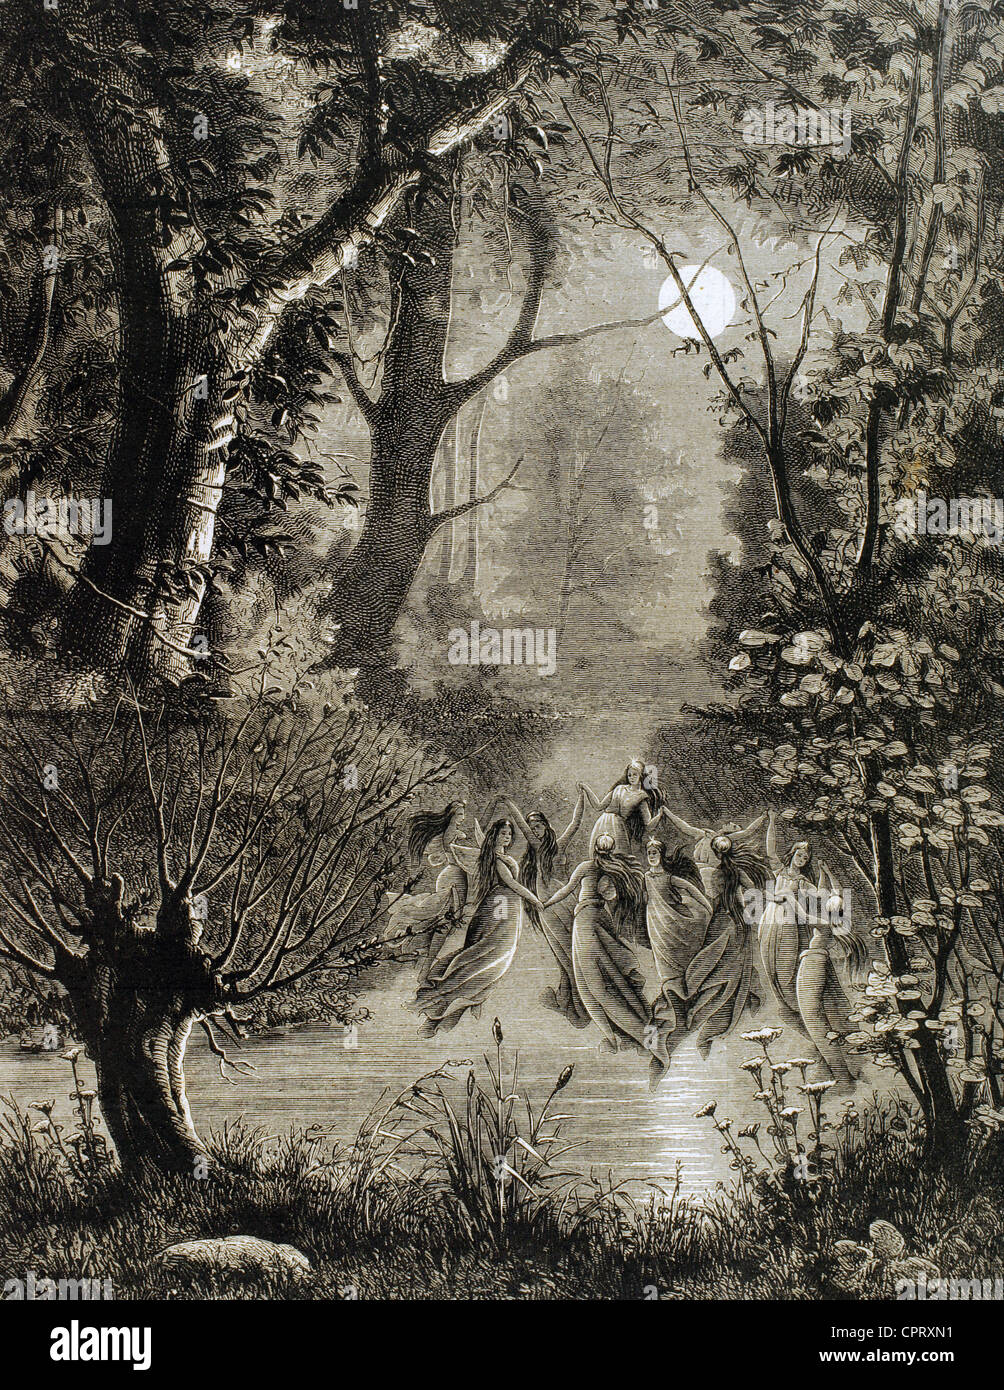 Spirits of nature. Undines in a circle over the water of a river. Engraving of The Illustration, 1885. Stock Photo